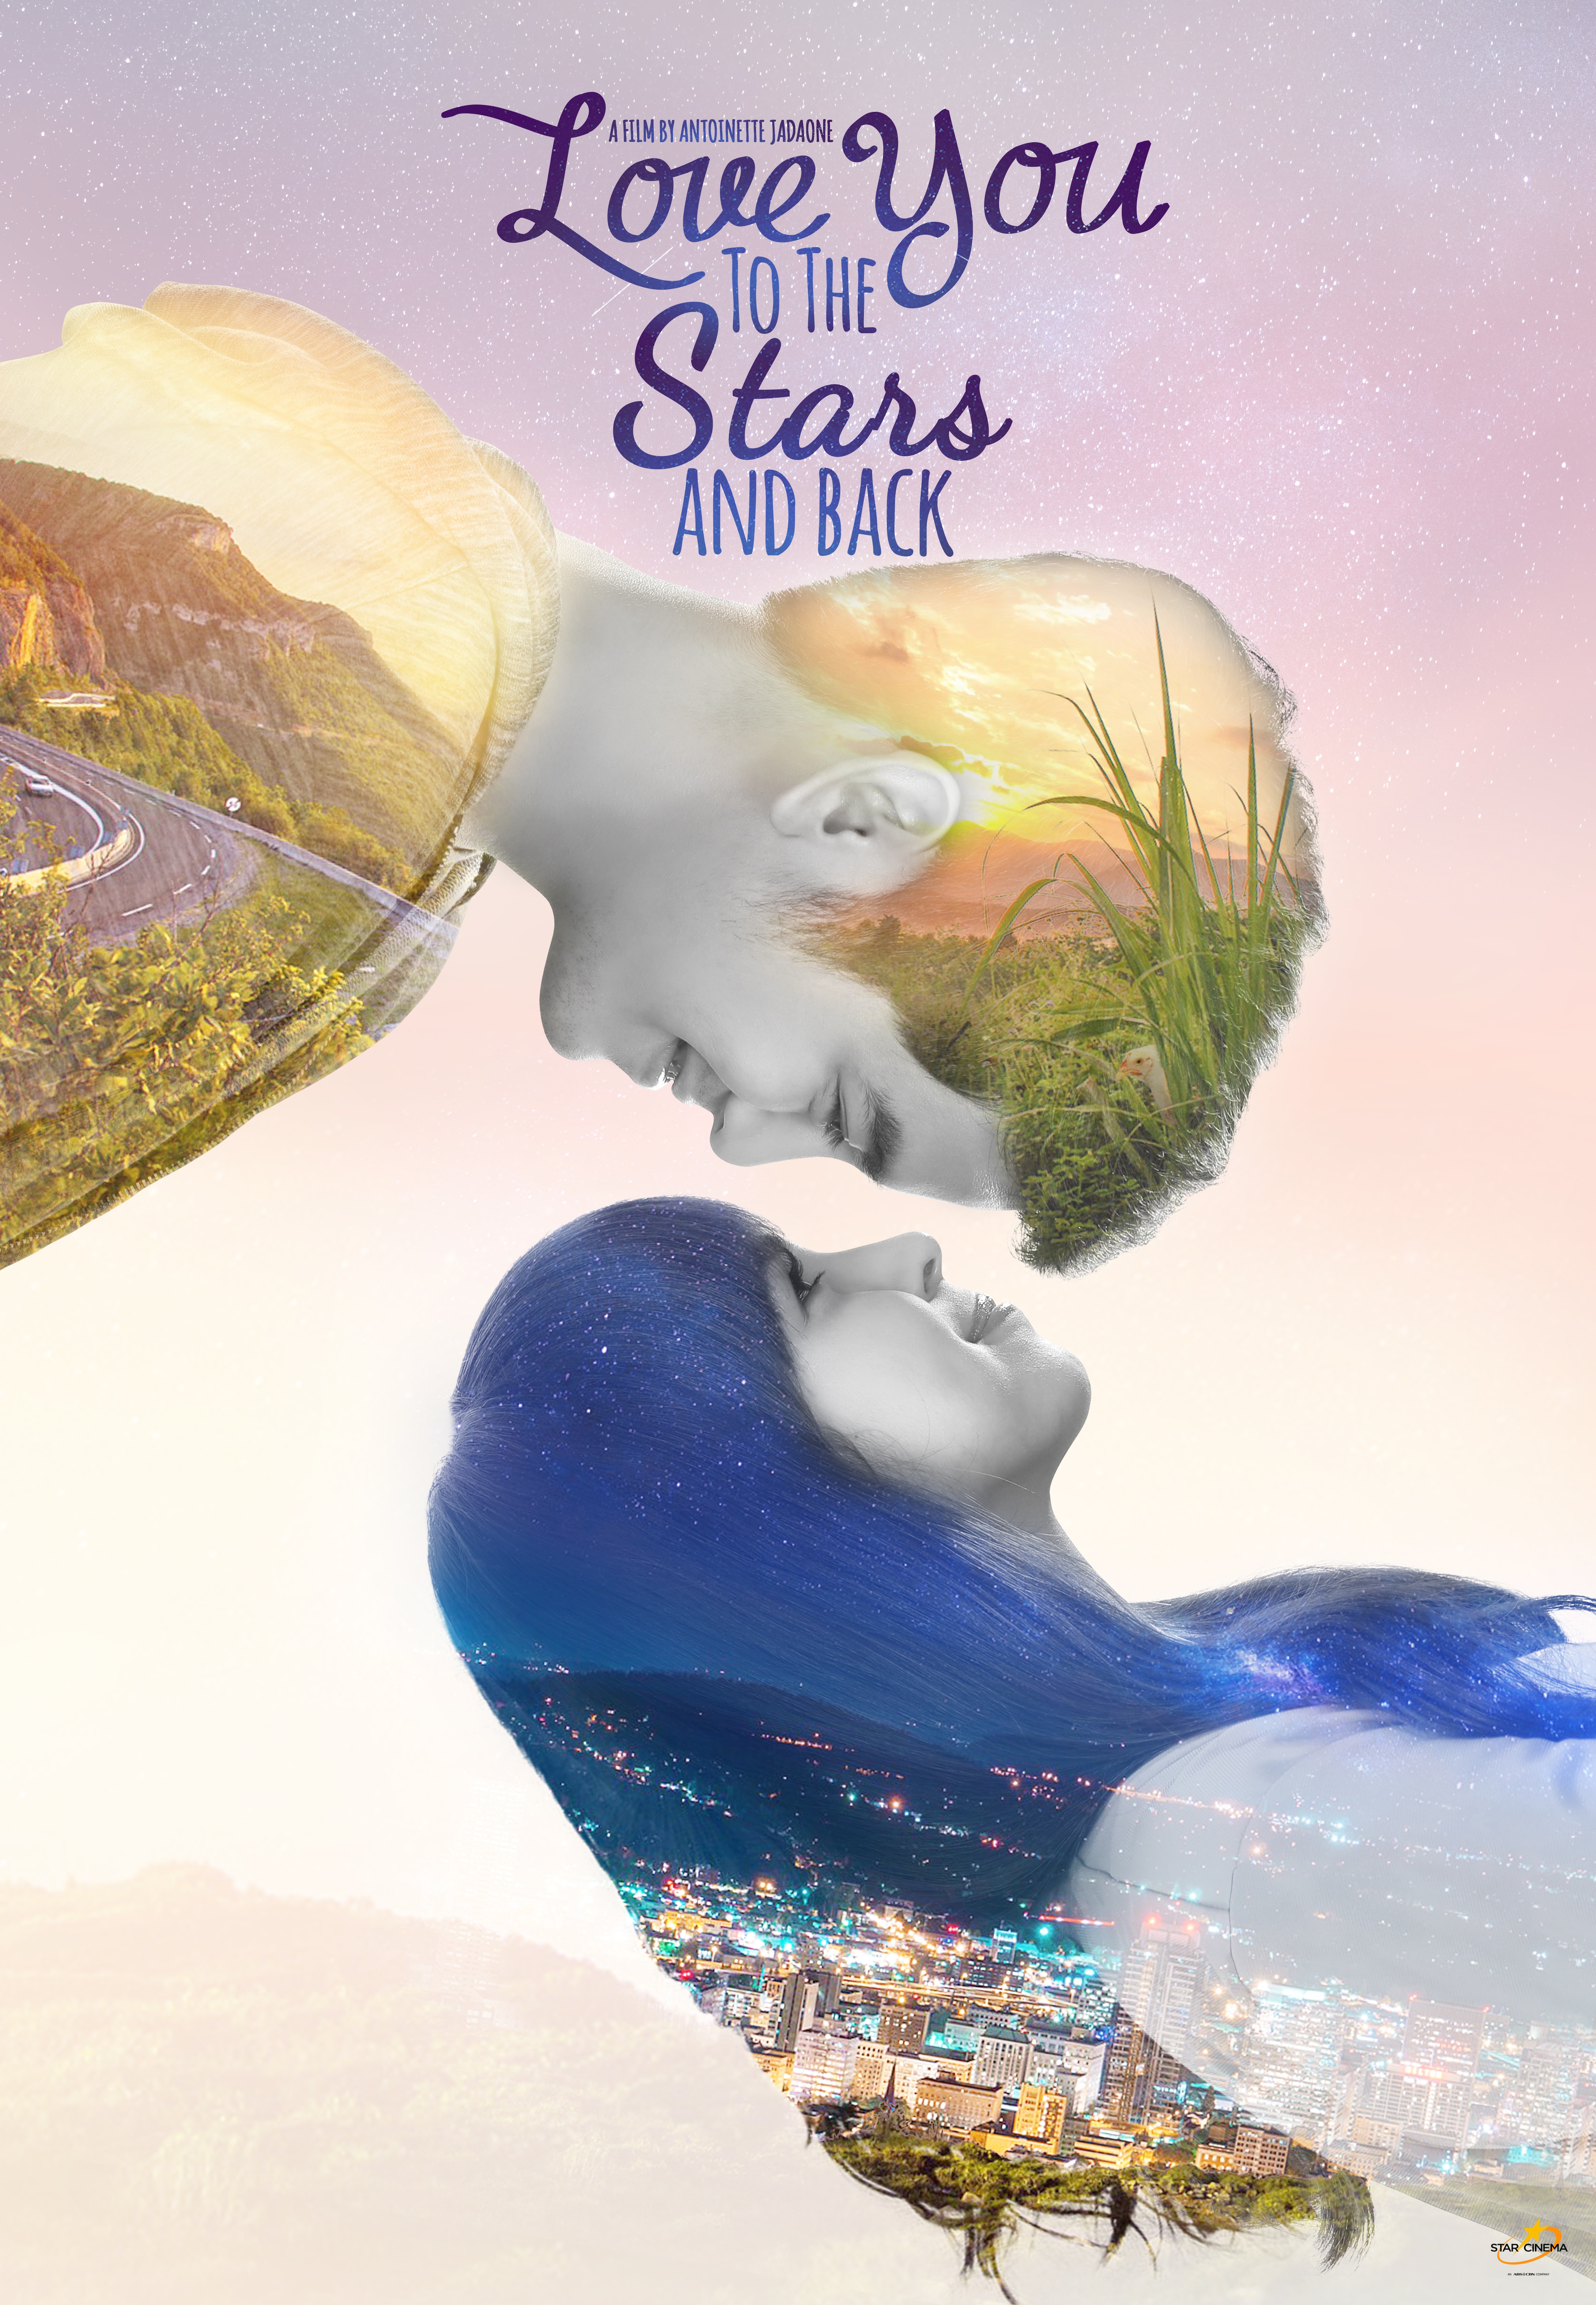 https://data-corporate.abs-cbn.com/corp/medialibrary/dotcom/isd_cast/298x442/love-you-to-the-stars-and-back-clean.jpg?ext=.jpg